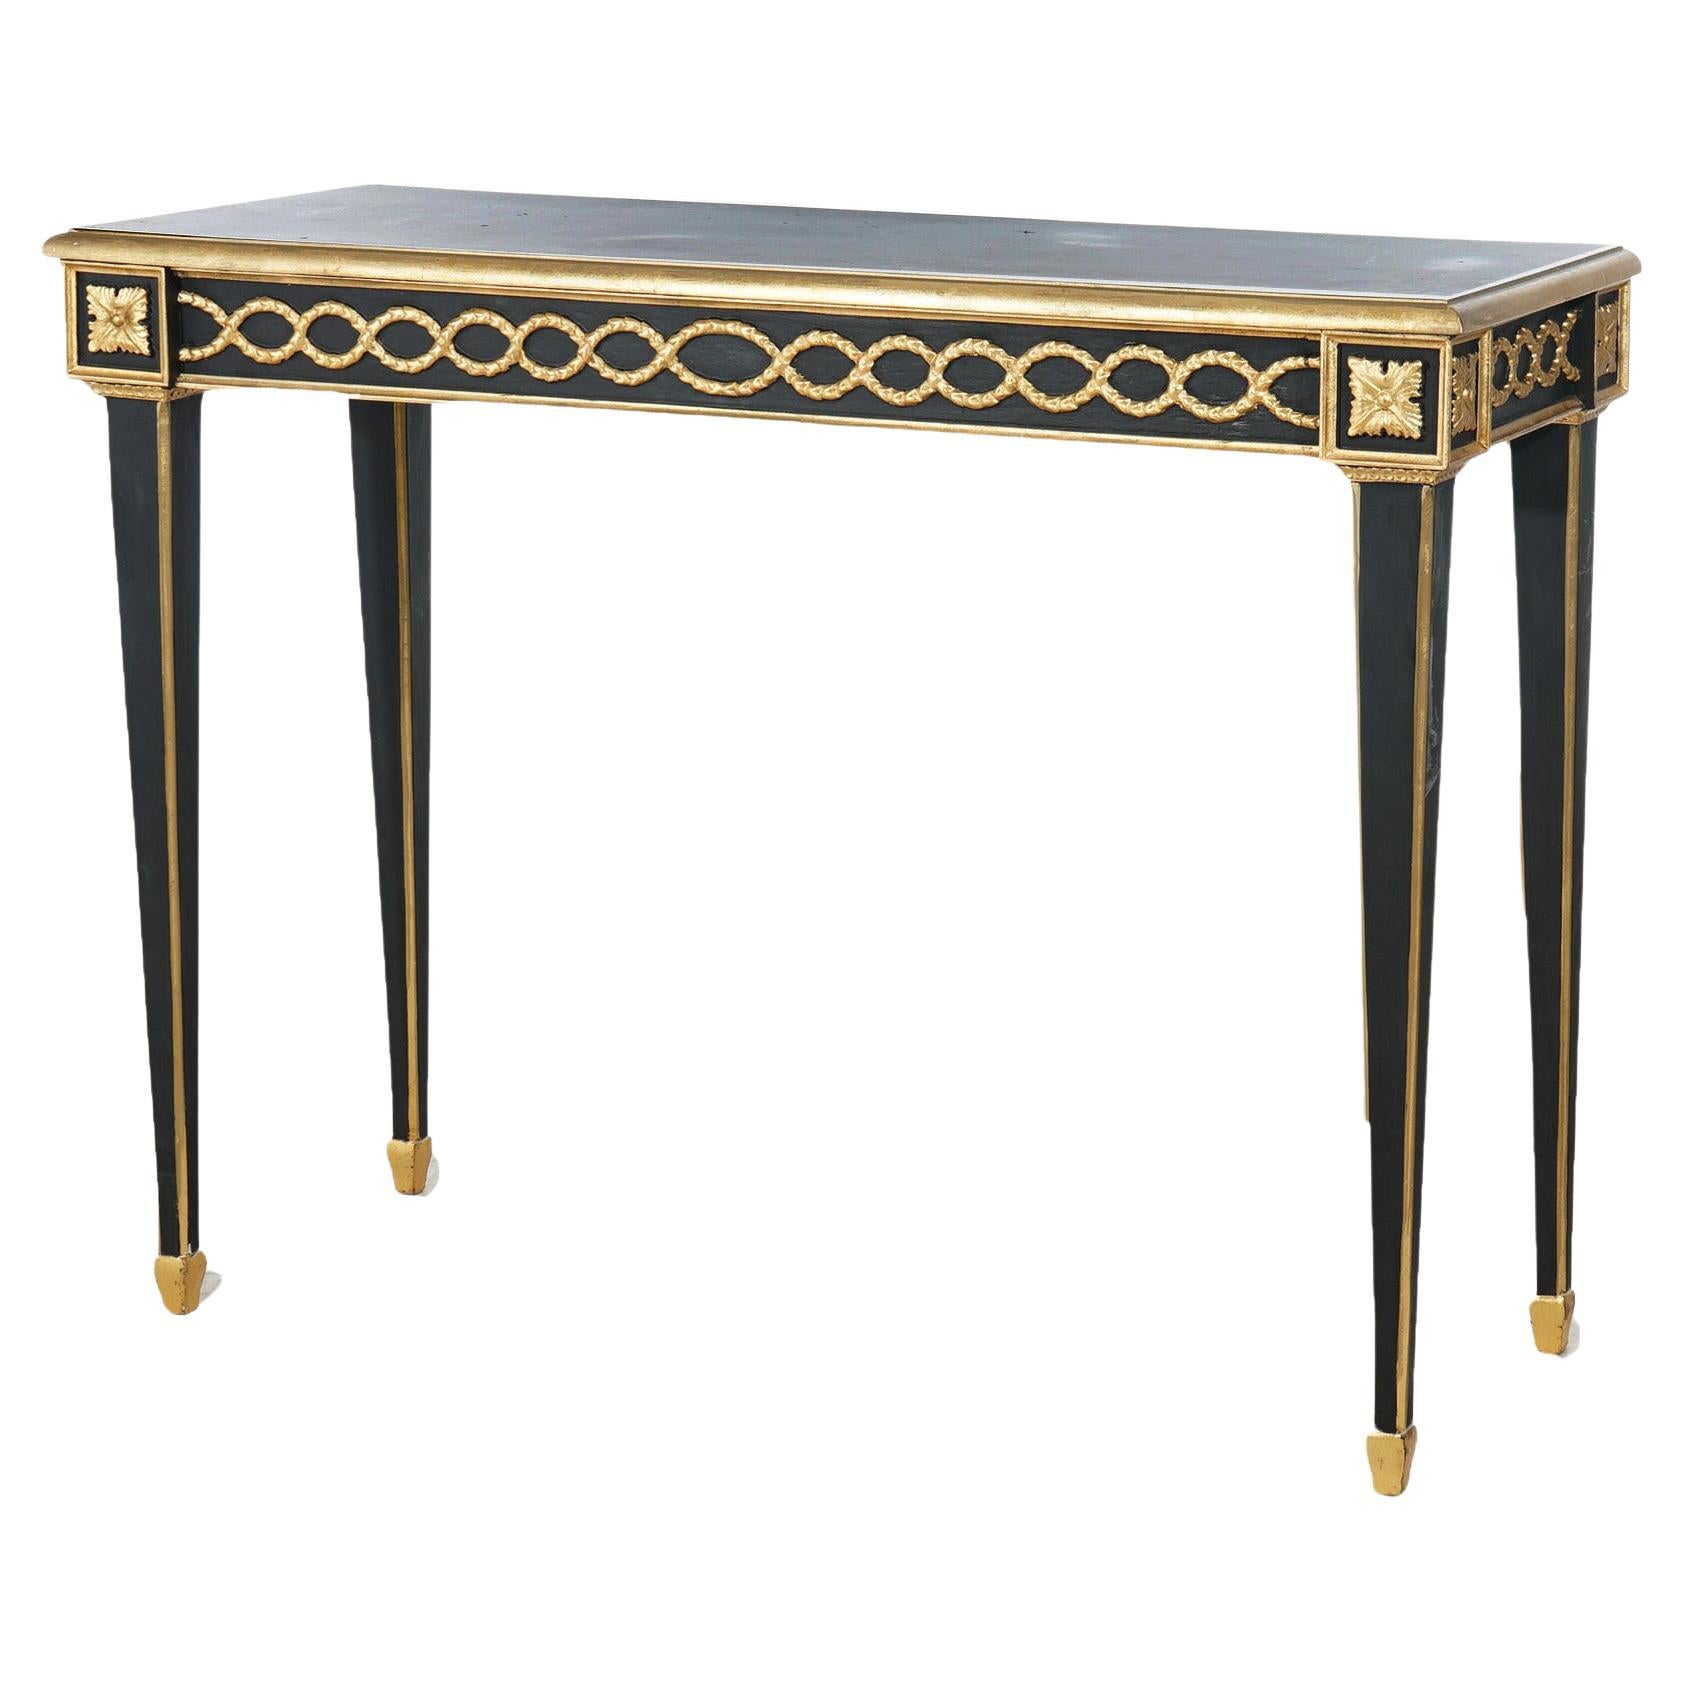 French Empire Style Ebonized & Gilt Console Table 20thC For Sale